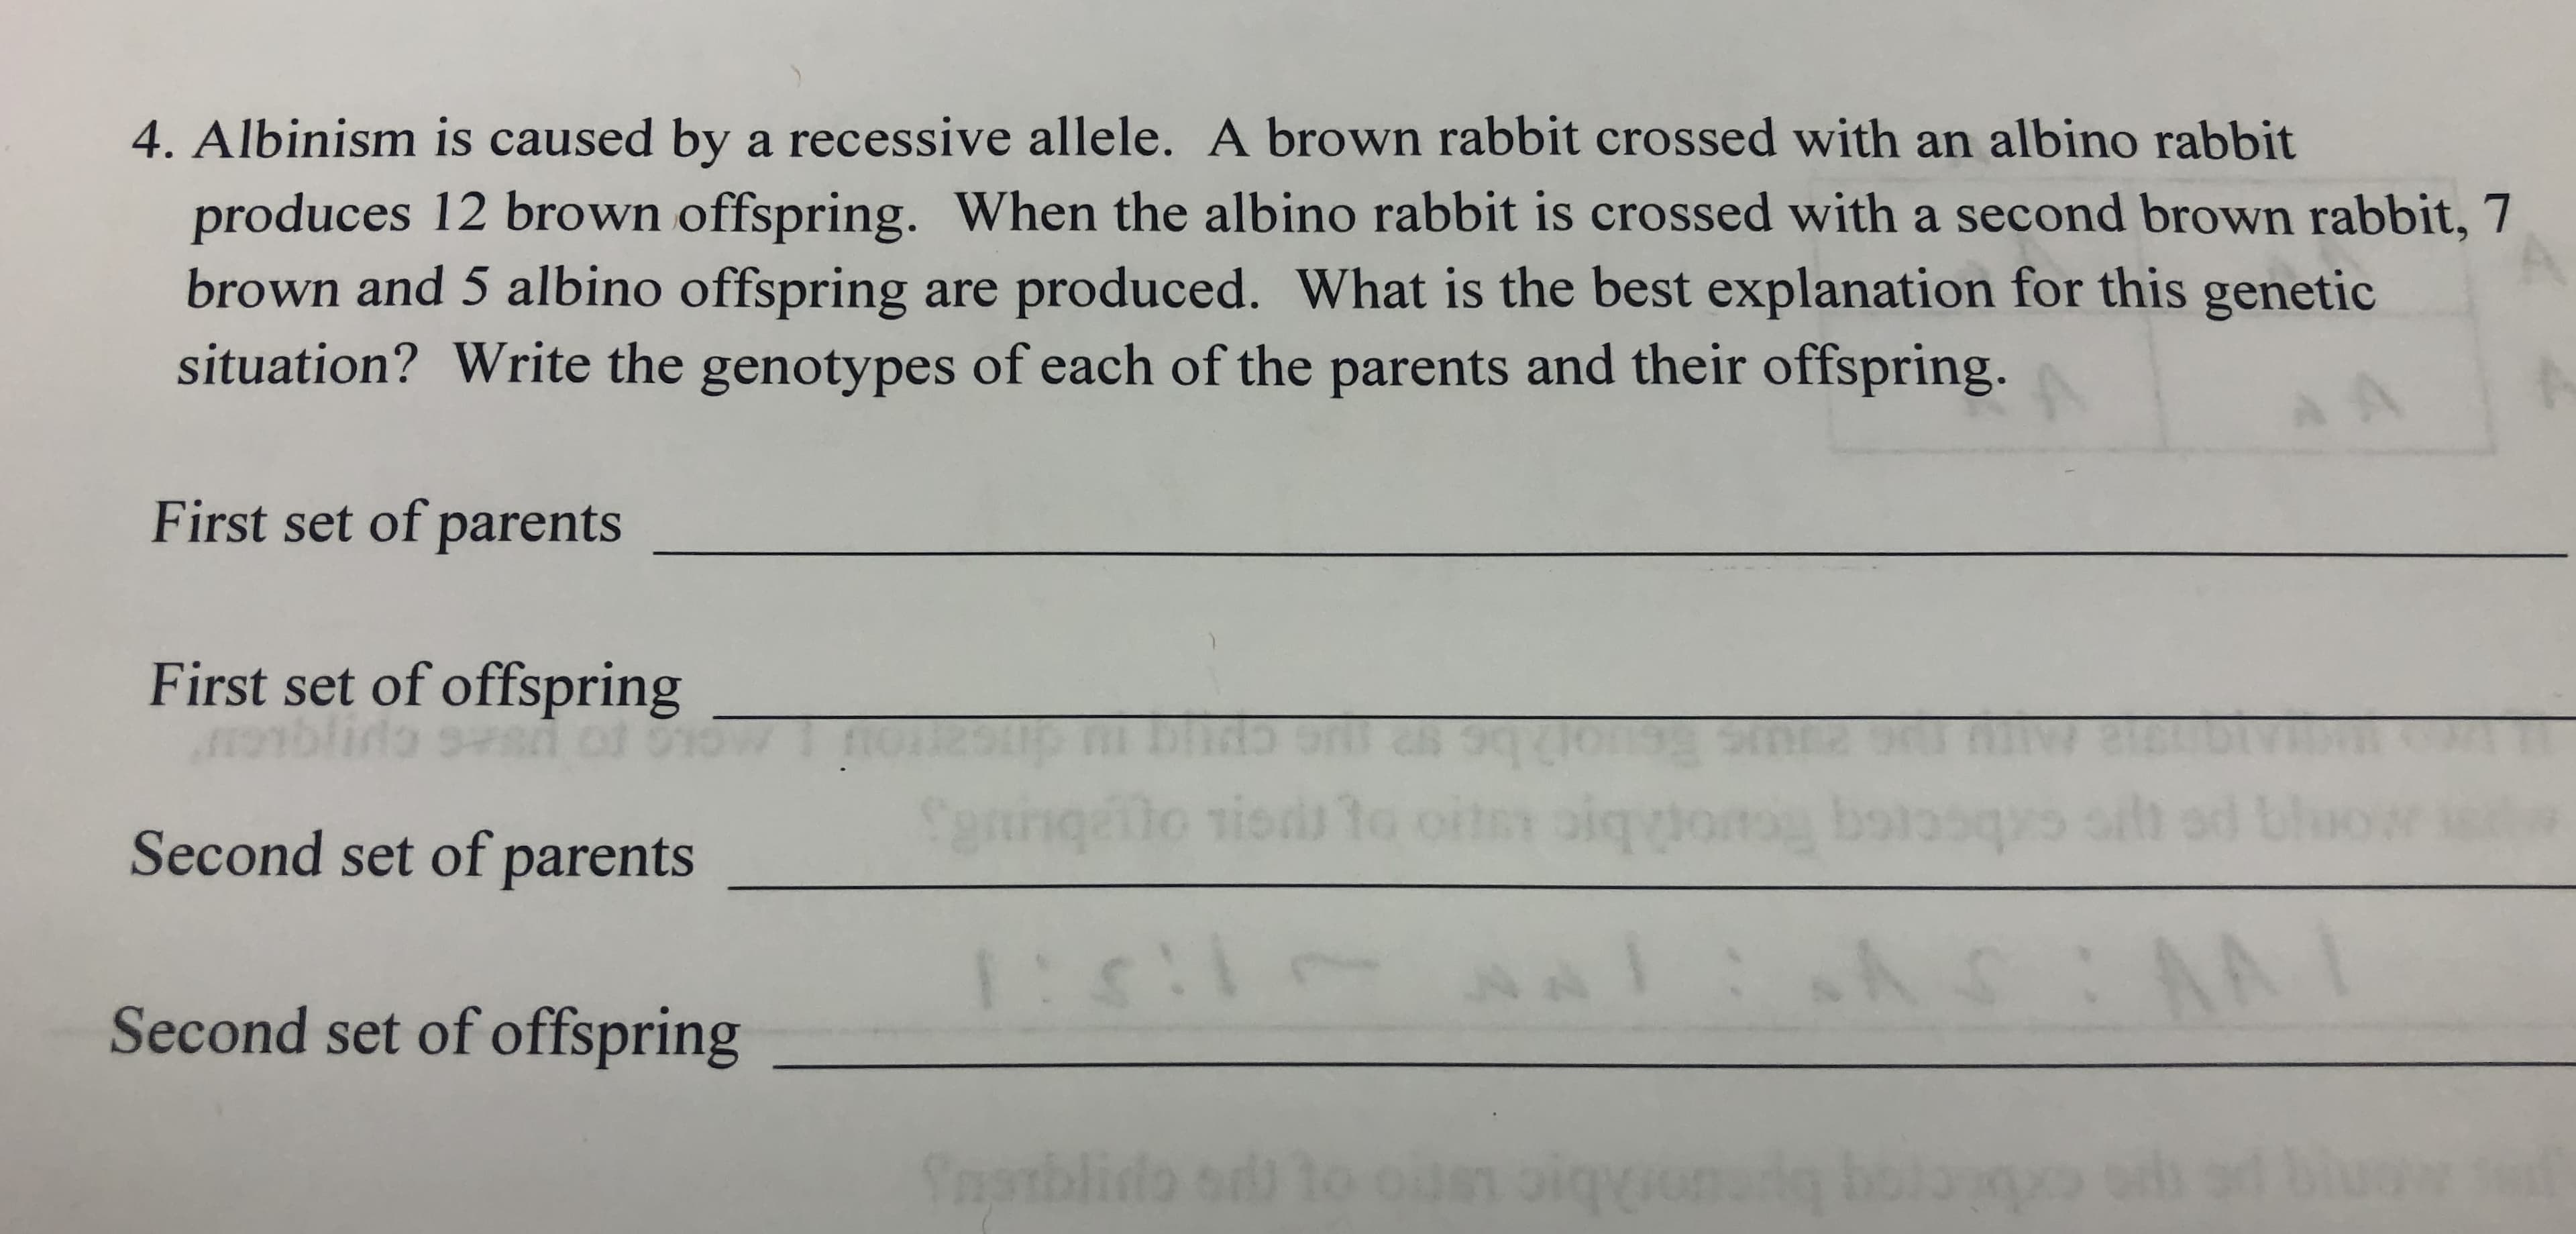 4. Albinism is caused bya recessive al lele. A brown rabbit crossed with an albino rabbit
produces 12 brown offspring. When the albino rabbit is crossed with a second brown rabbit, 7
brown and 5 albino offspring are produced. What is the best explanation for this genetic
situation? Write the genotypes of each of the parents and their offspring.
A
First set of parents
First set of offspring
Cenng
to ri
Second set of parents
e
1:s!!
A
A
Second set of offspring
Sbl
